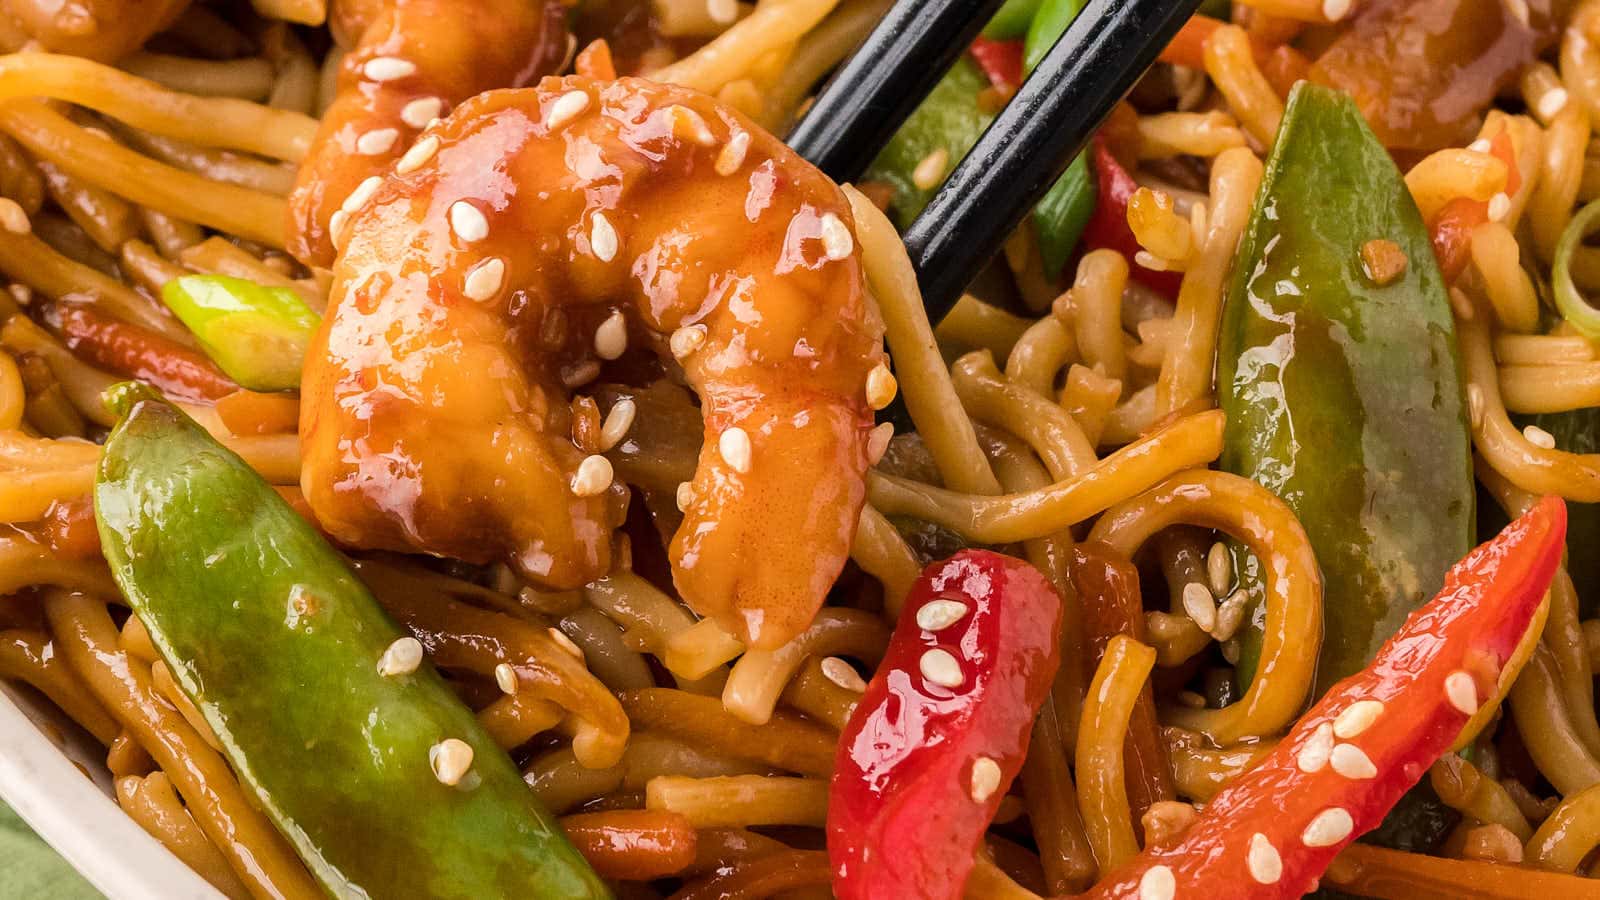 Shrimp Lo Mein recipe by Cheerful Cook.